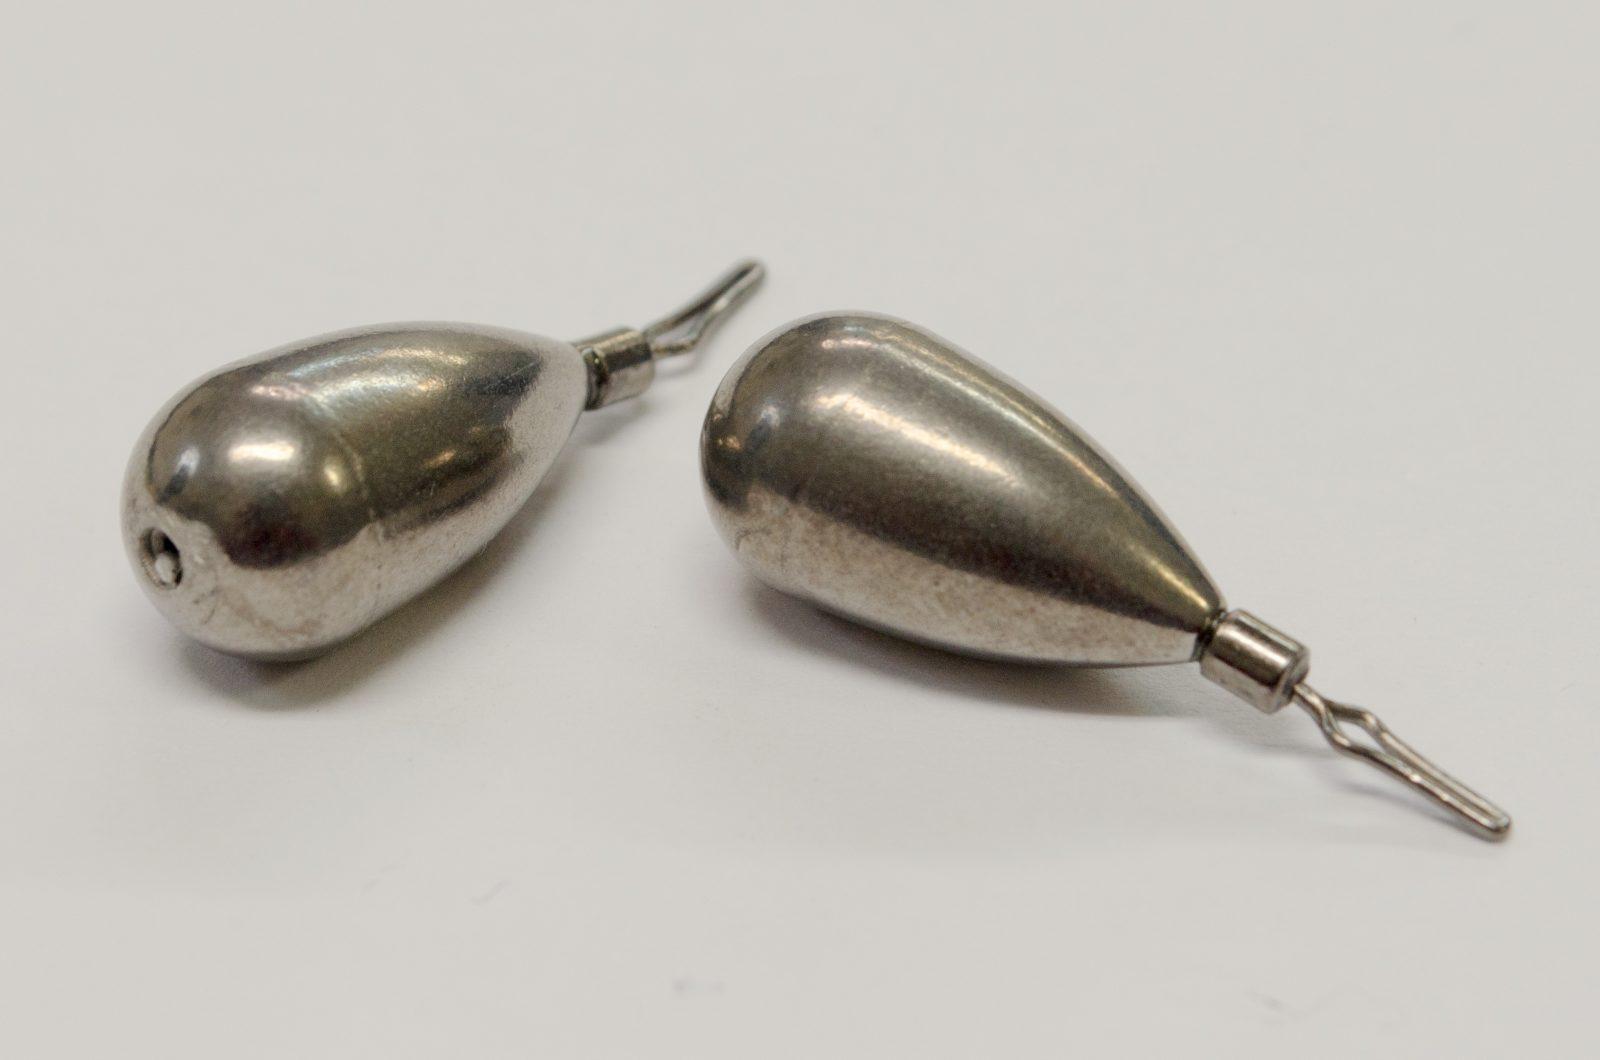 Tungsten Tear and Round weights - Tungsten For Fishing